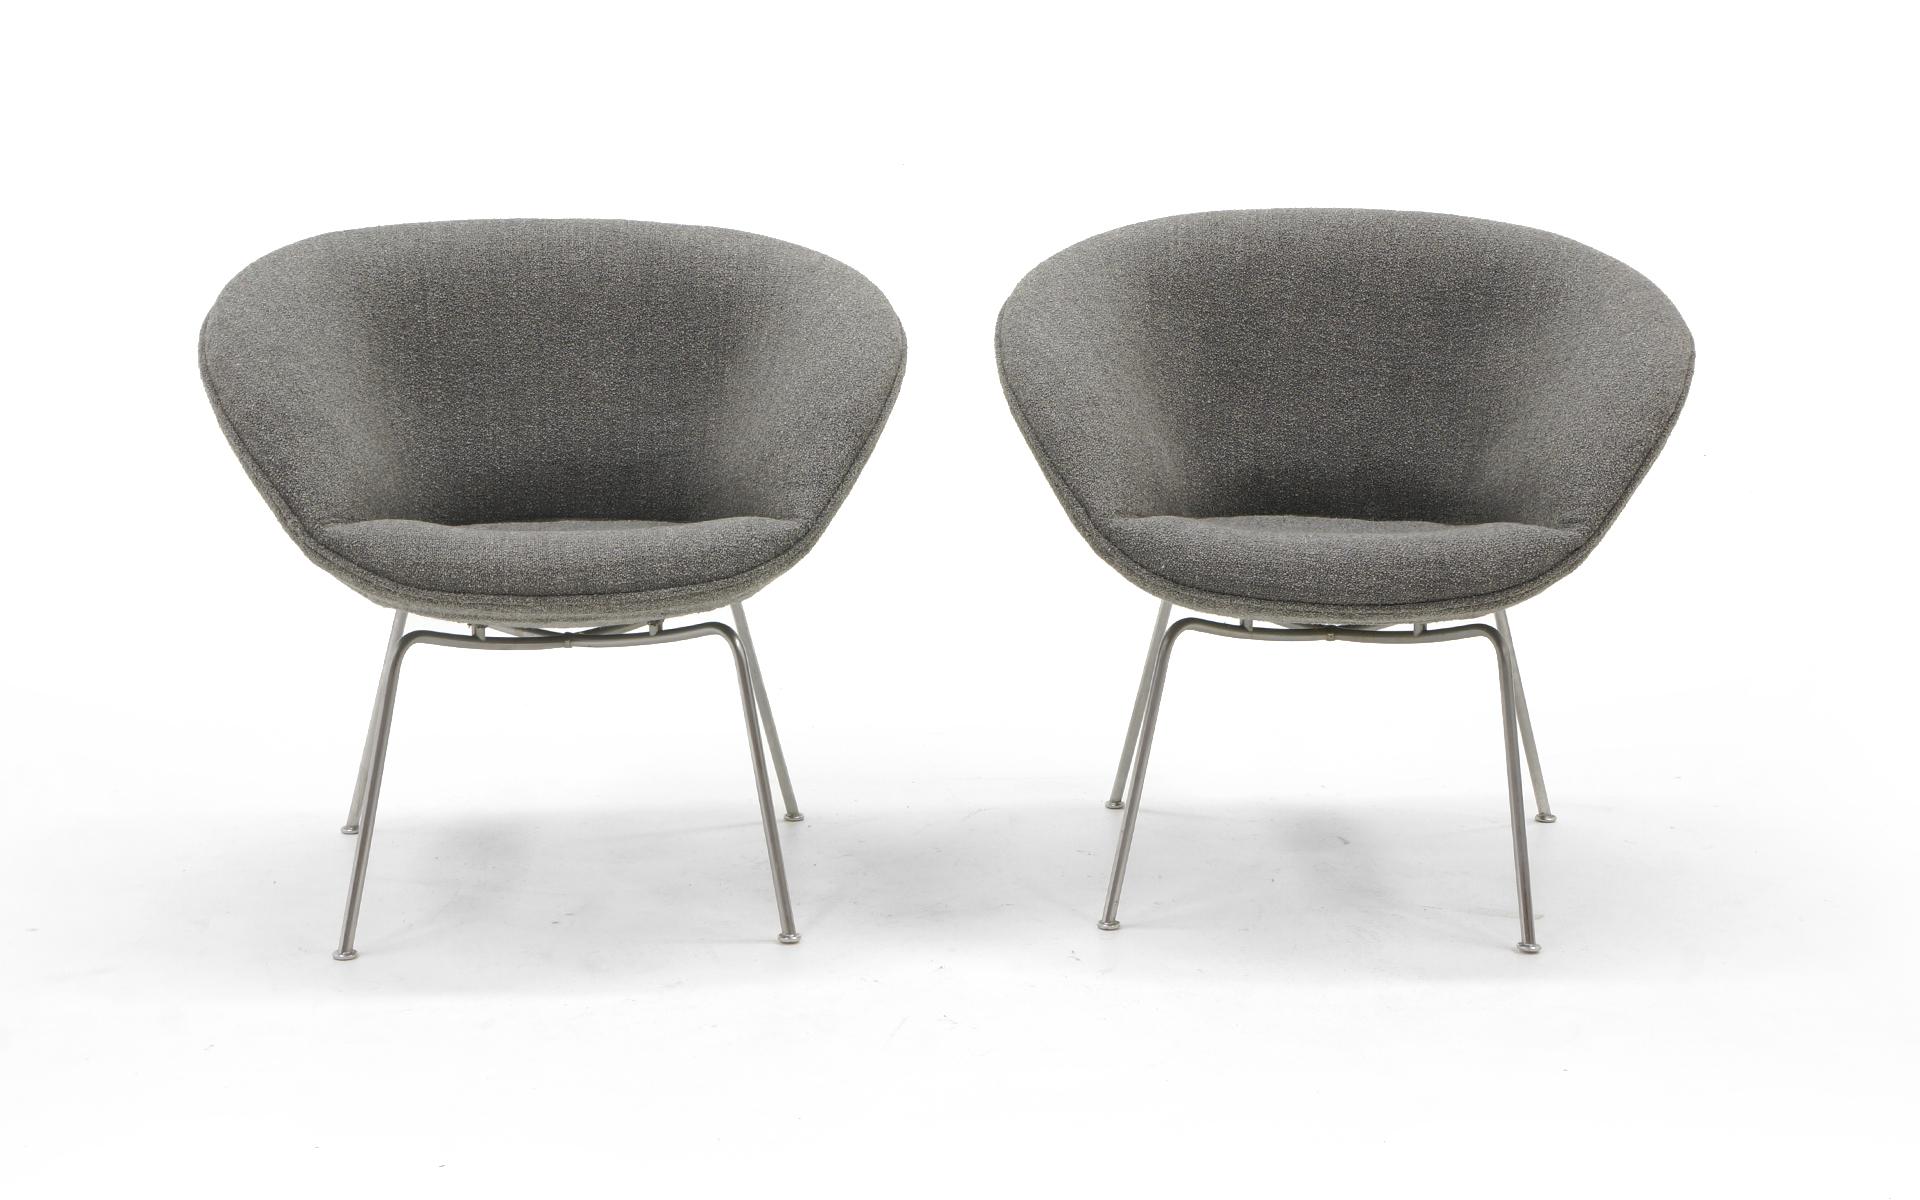 Pair of Arne Jacobsen Pot Chairs manufactured by Fritz Hansen, Denmark. The original chairs have been expertly restored and reupholstered in a medium grey / grey Maharam fabric. All new foam and batting. The original finish on the legs show some